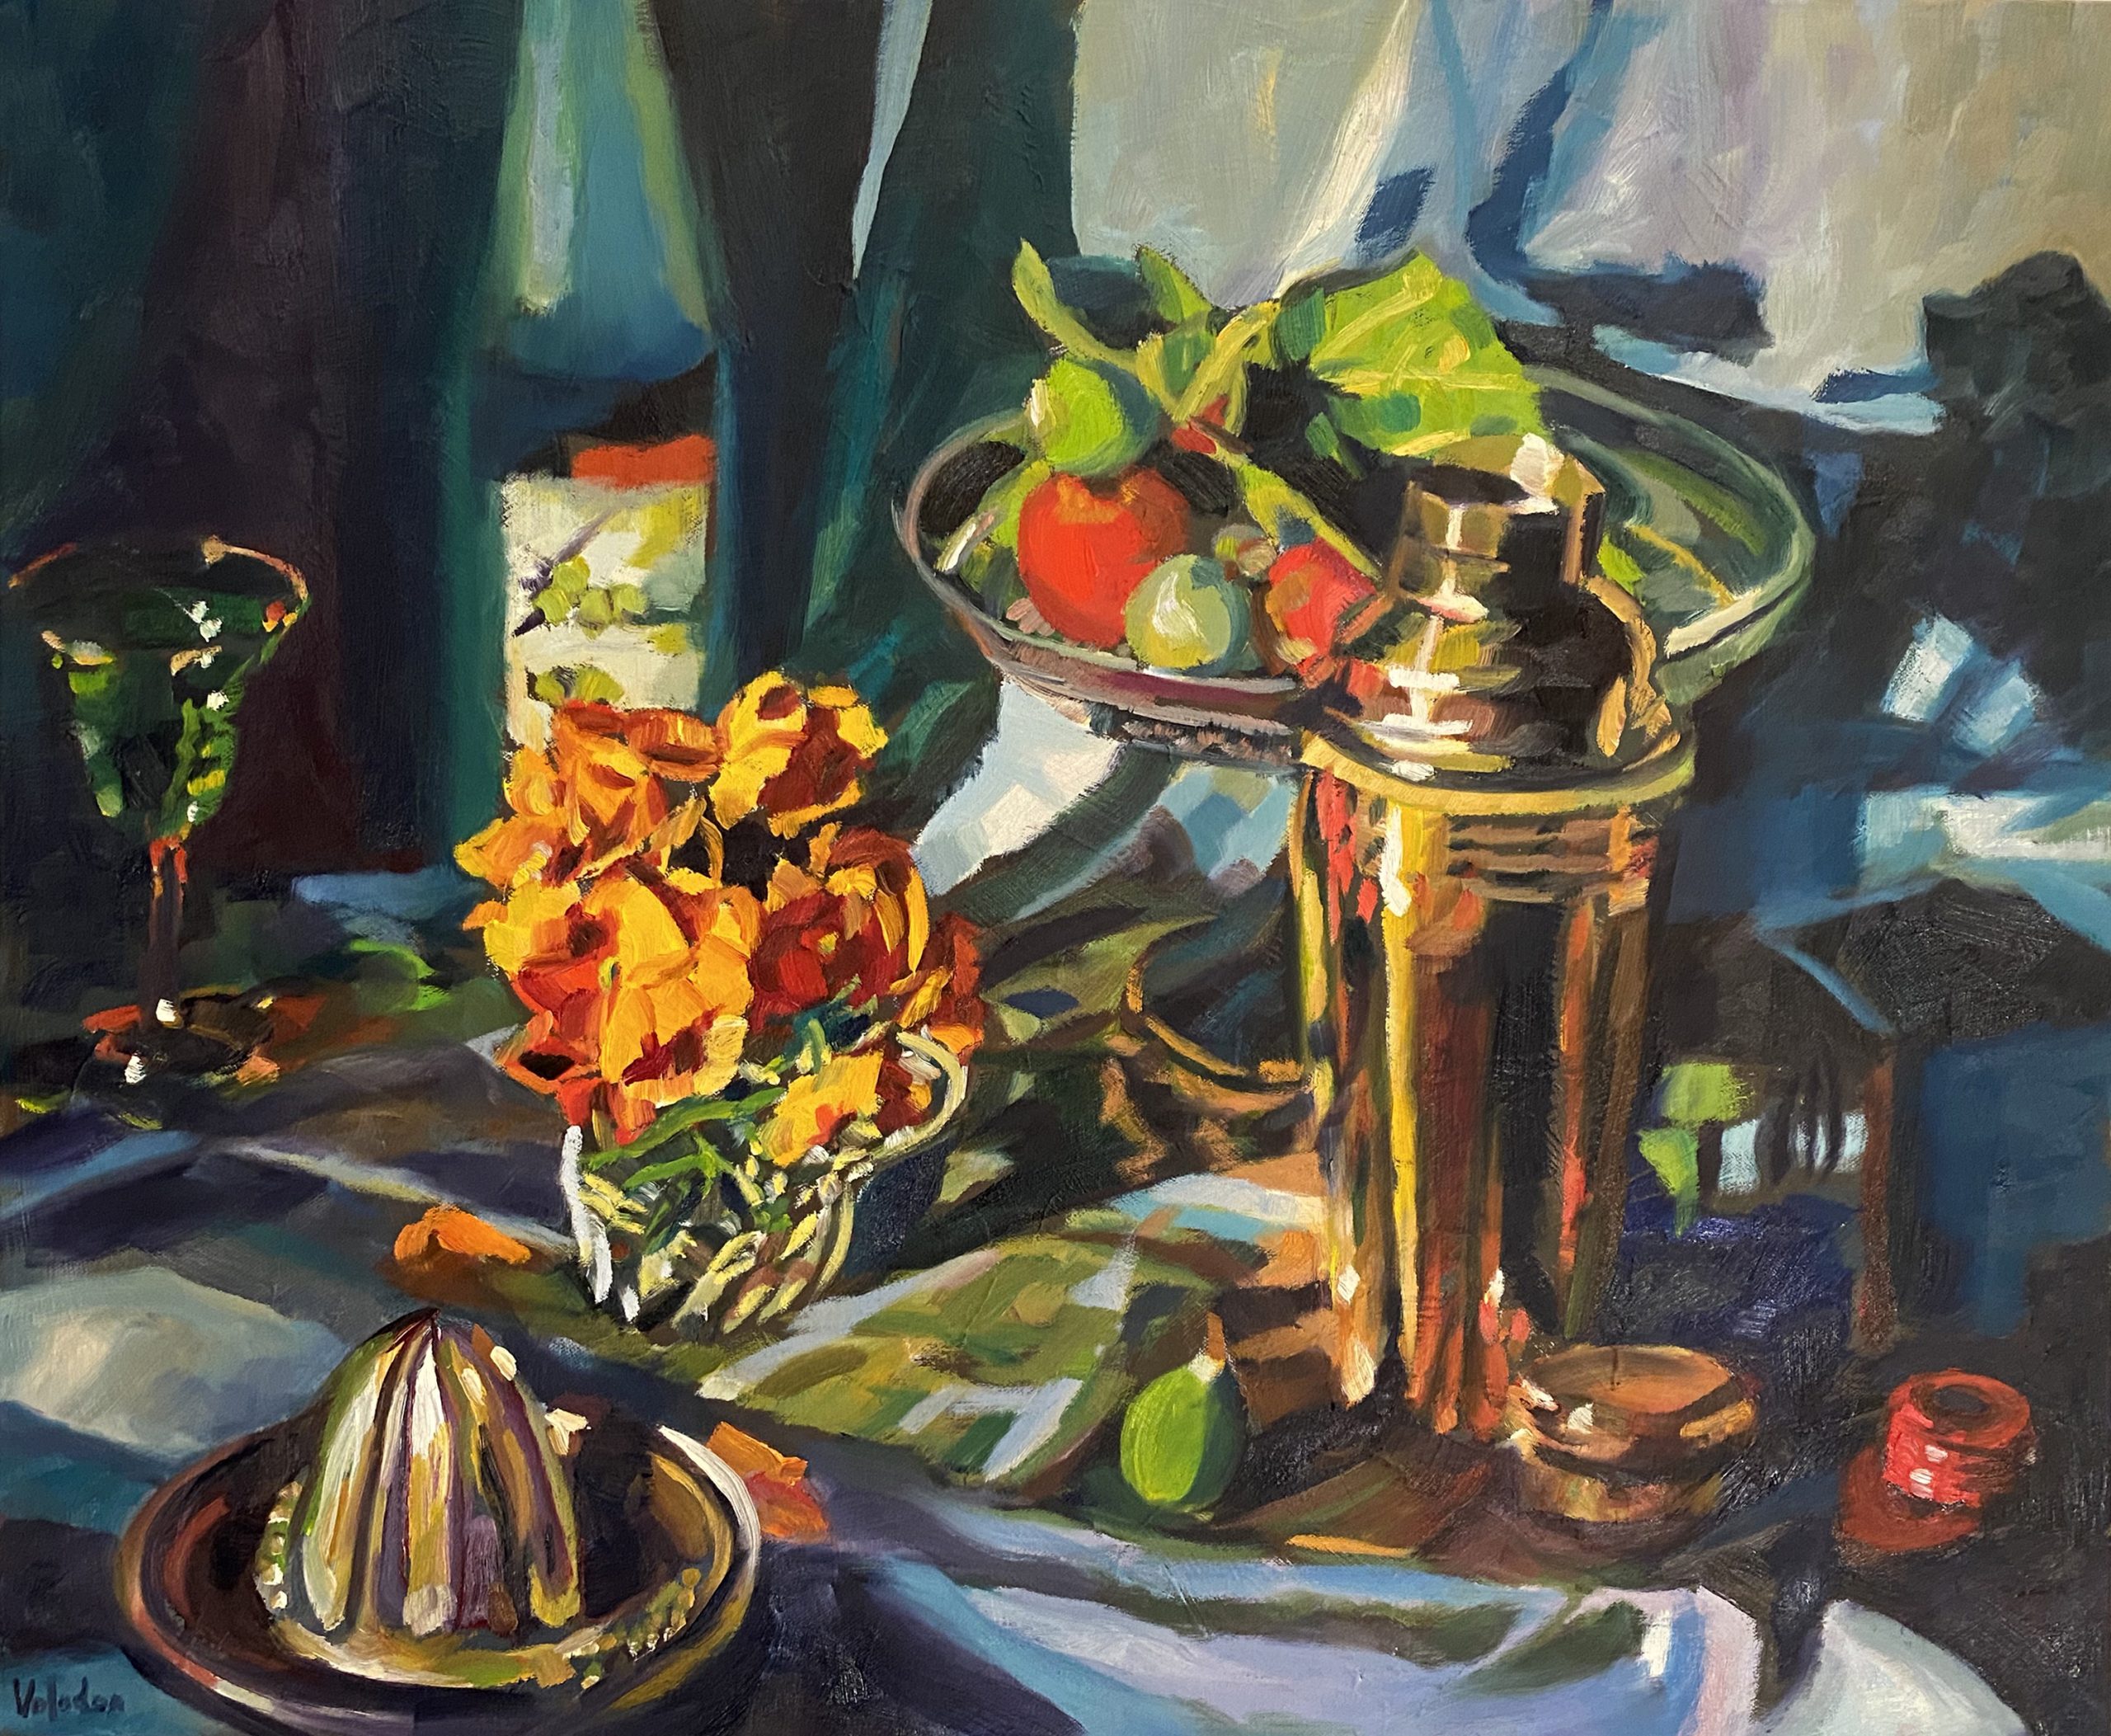 Rosemary Valadon 'Orange Pansies and Sour Apple' oil on canvas 61 x 76cm $9,600